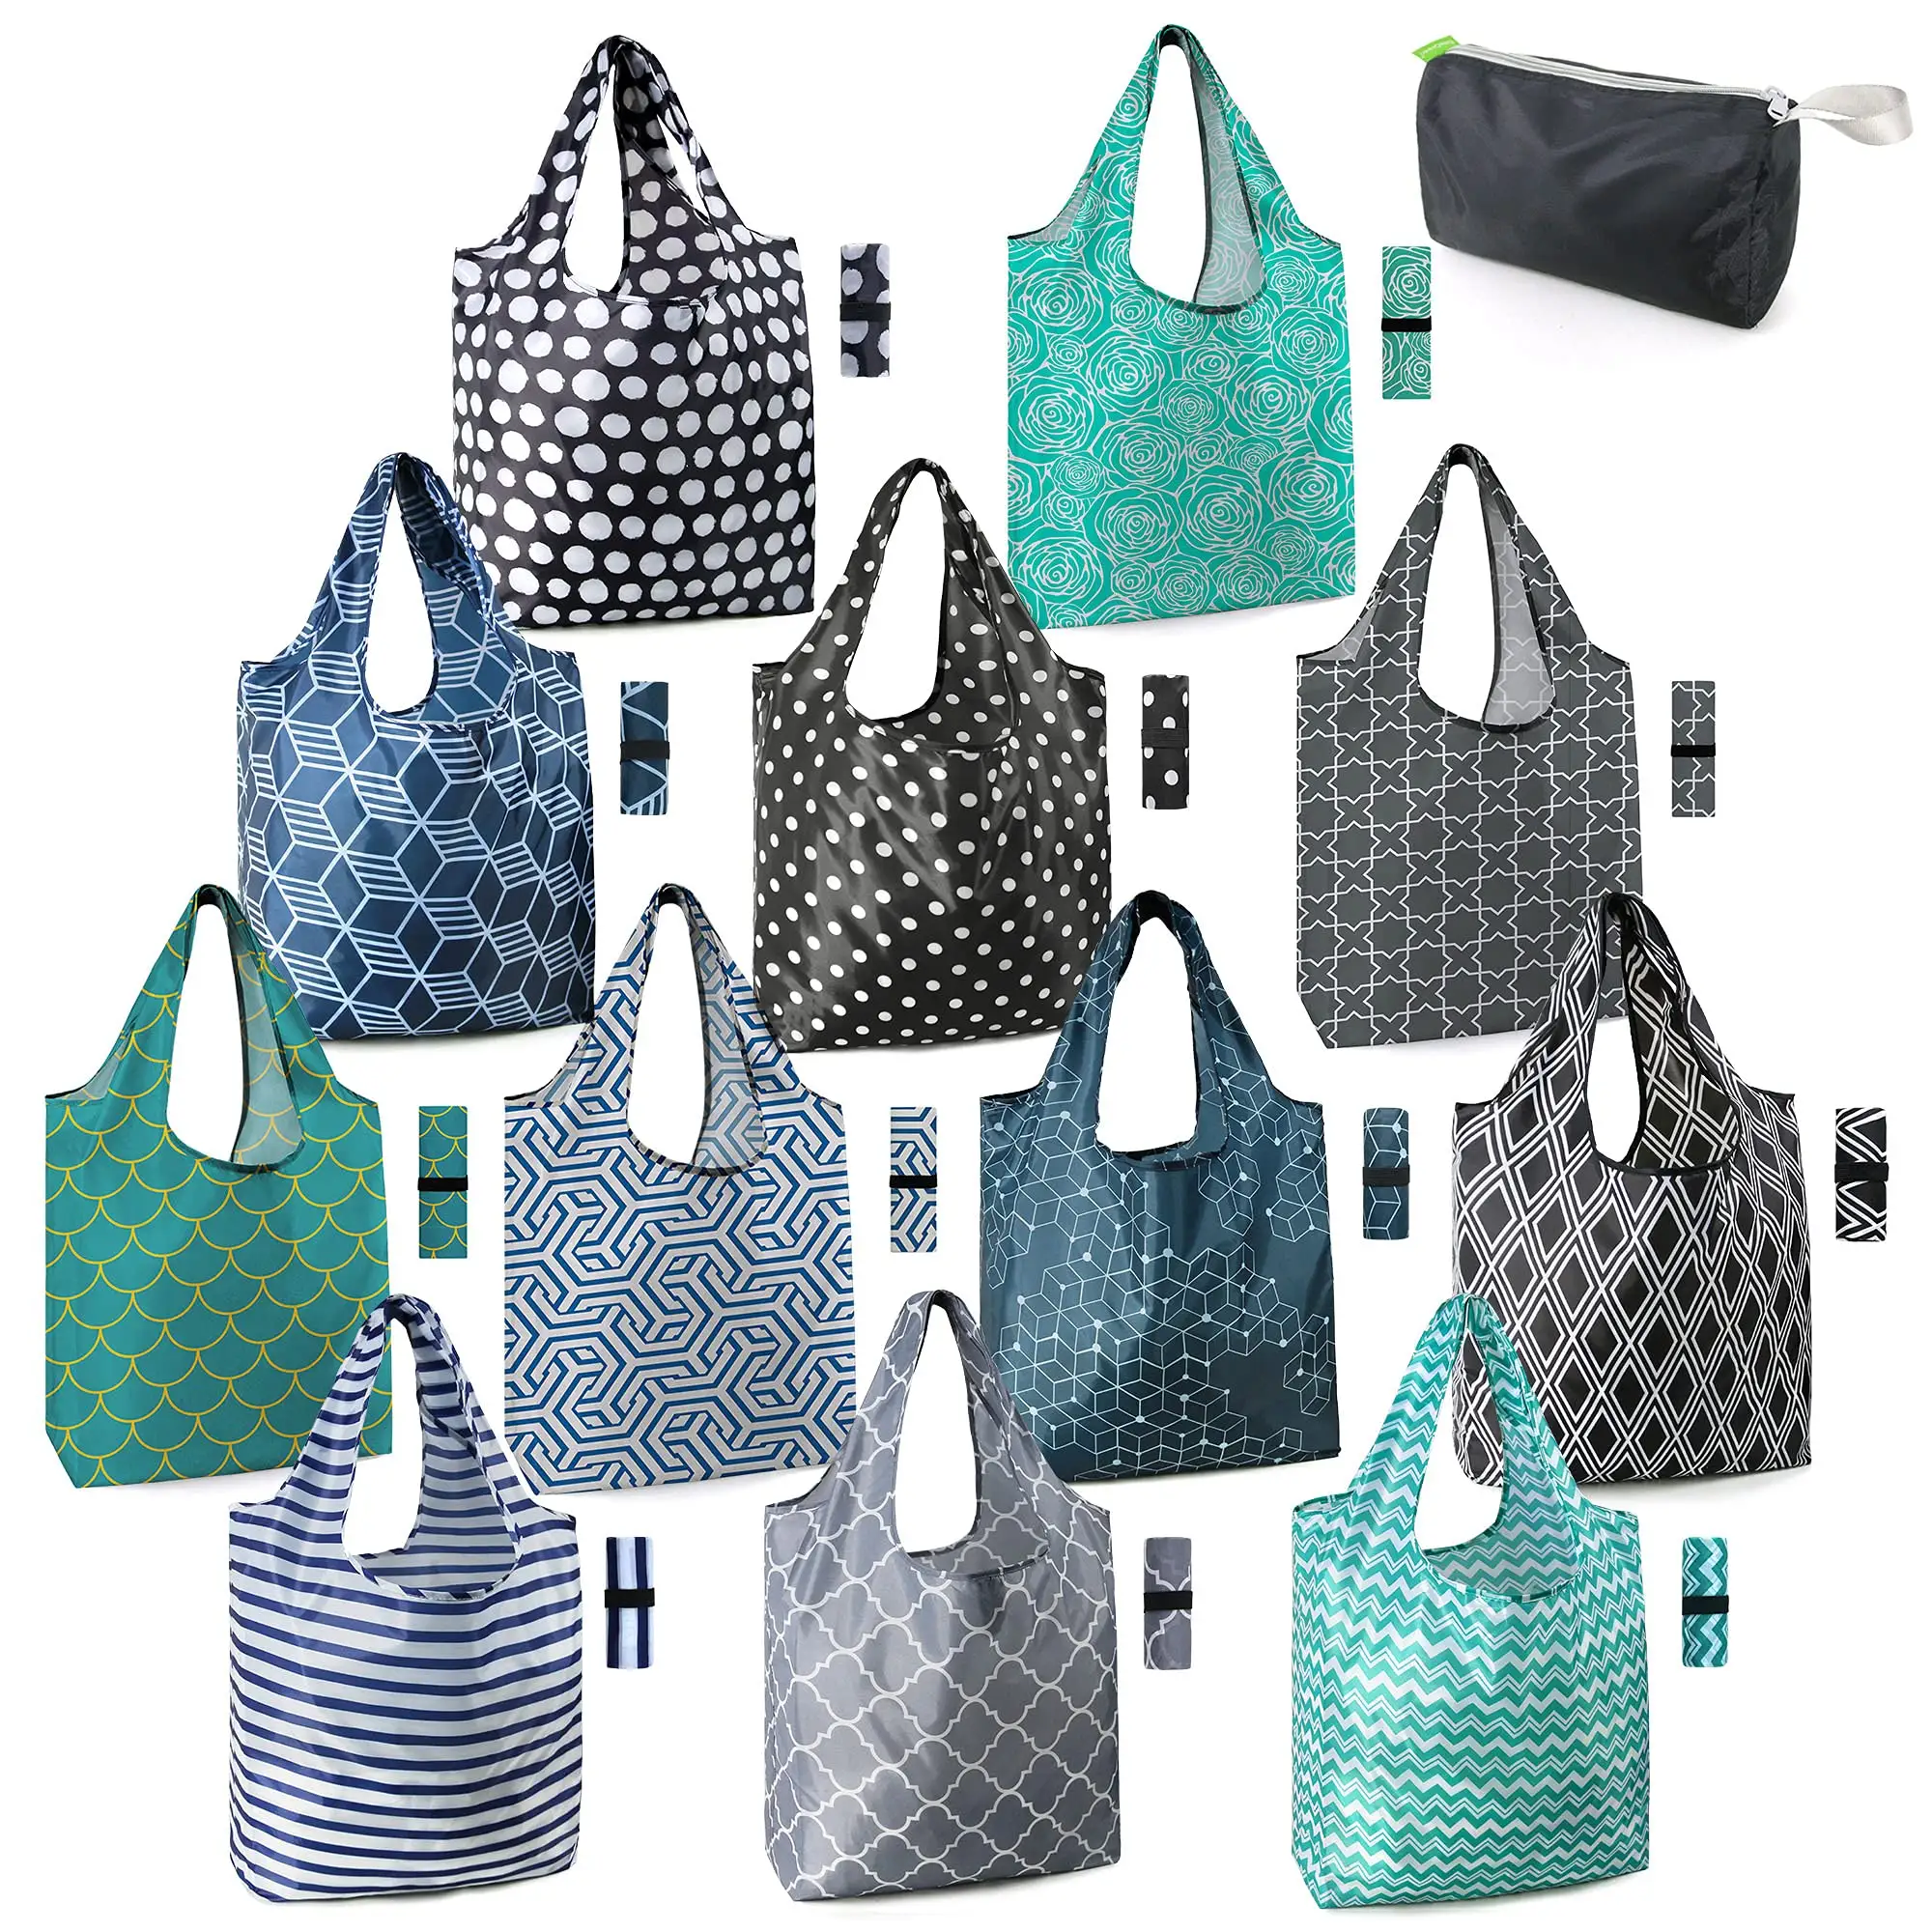 100% Recycled Reusable Grocery Polyester Lightweight Classic Geometric Design Gift Tote Grocery Bags with Elastic Band